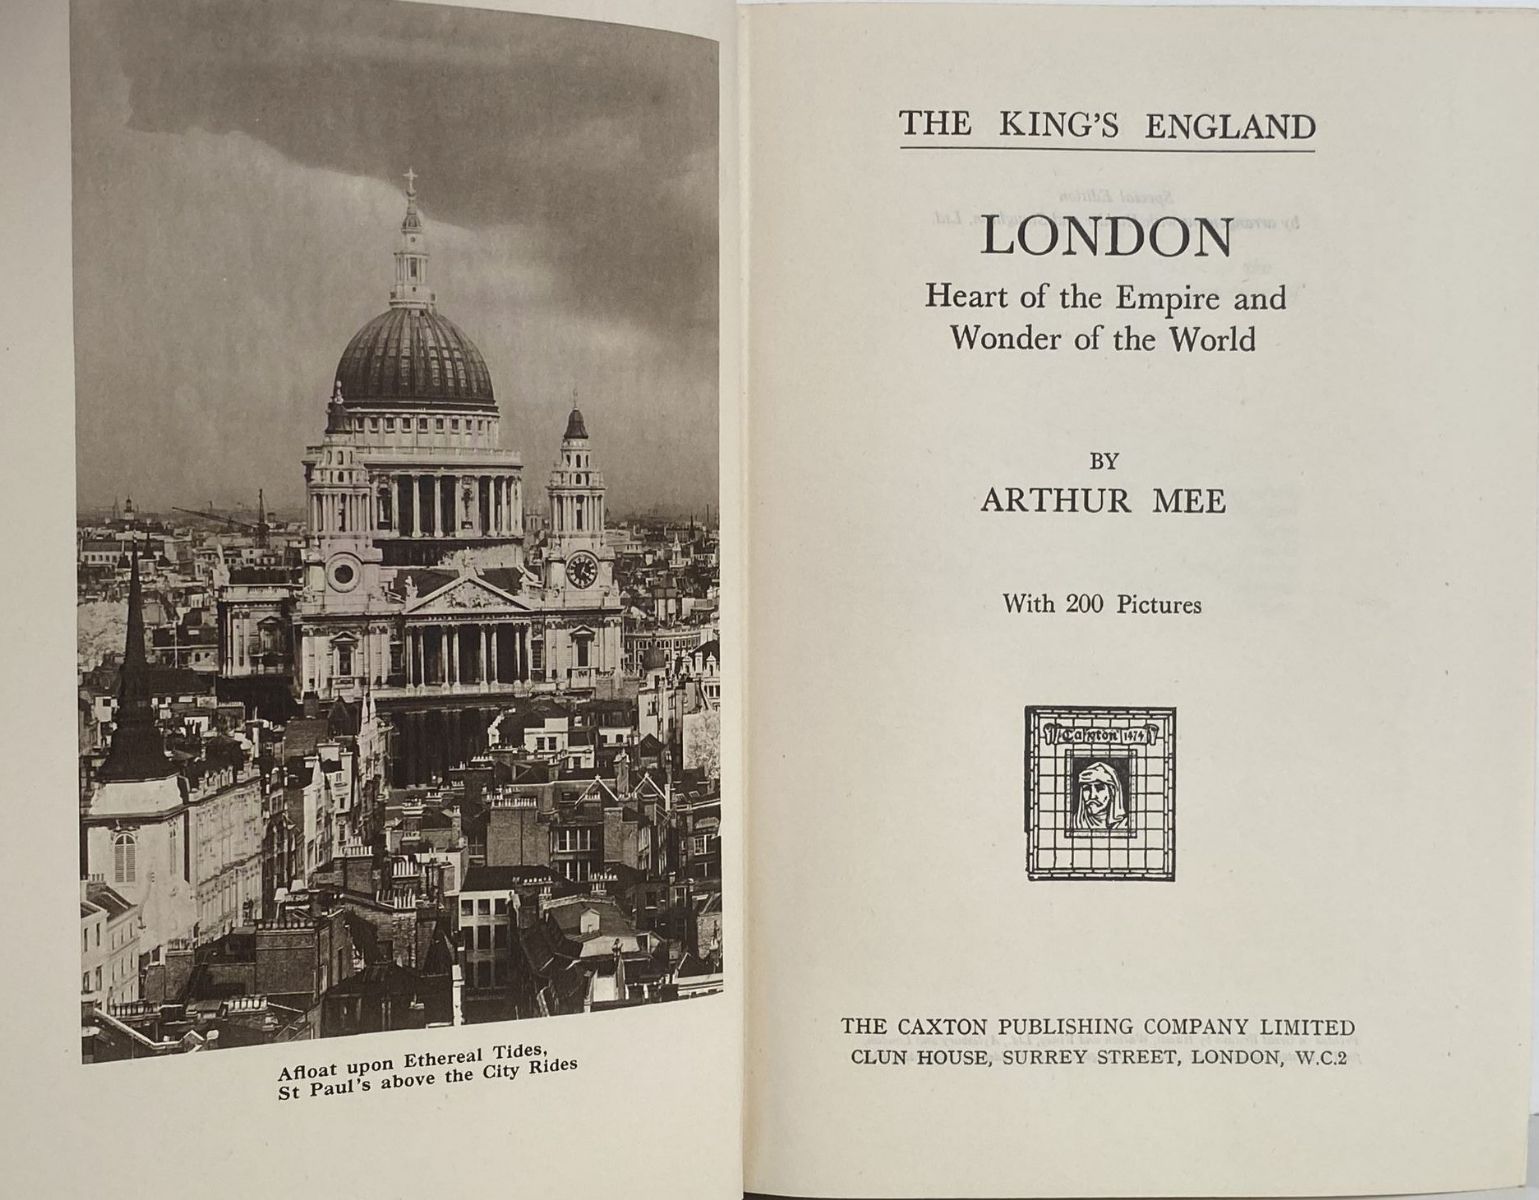 THE KING'S ENGLAND: London - Heart of the Empire